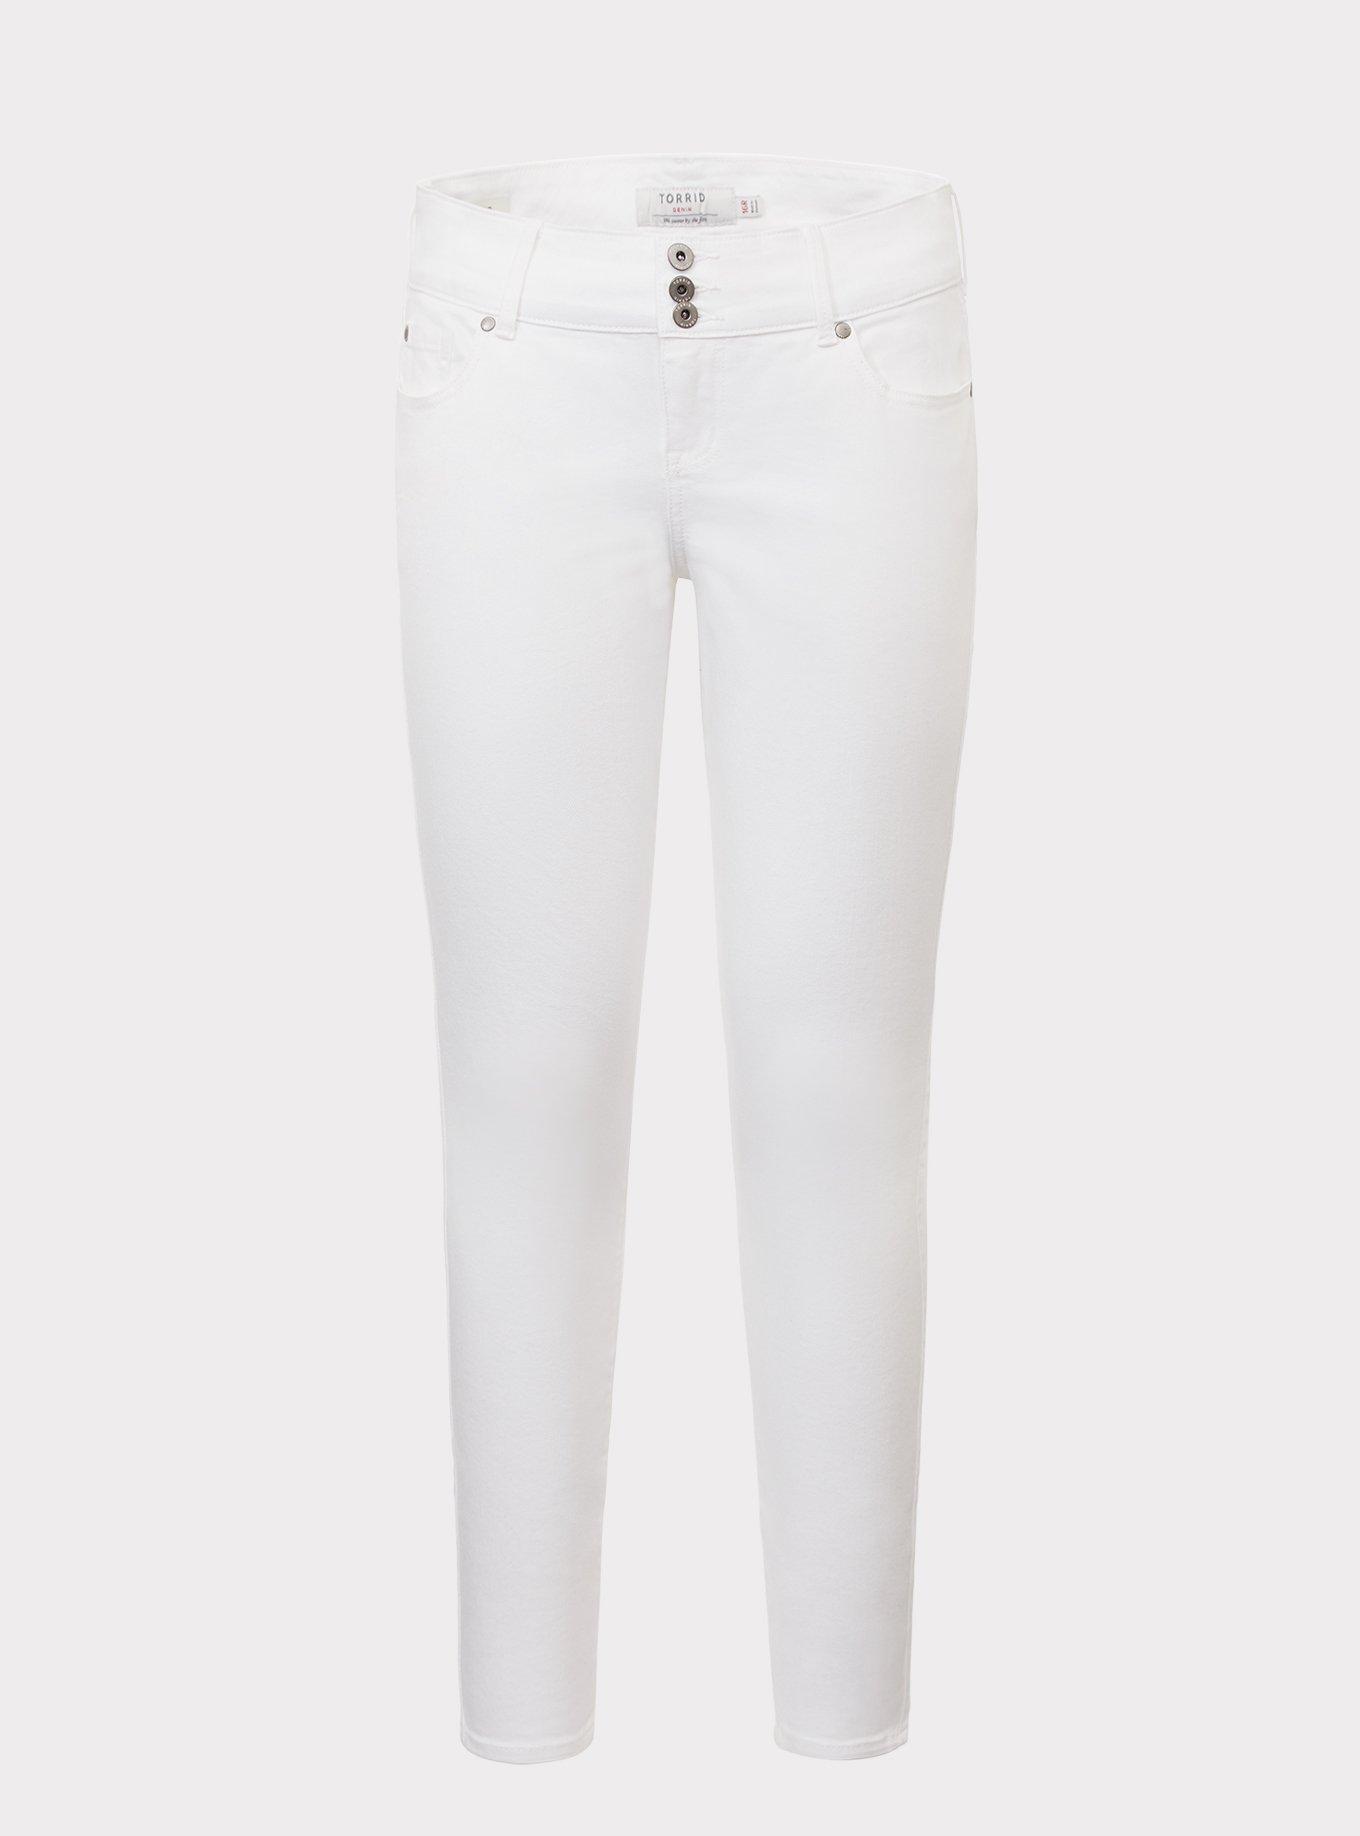 Iconic by Ashley Stewart Women's White Pull On Jegging Size 30R